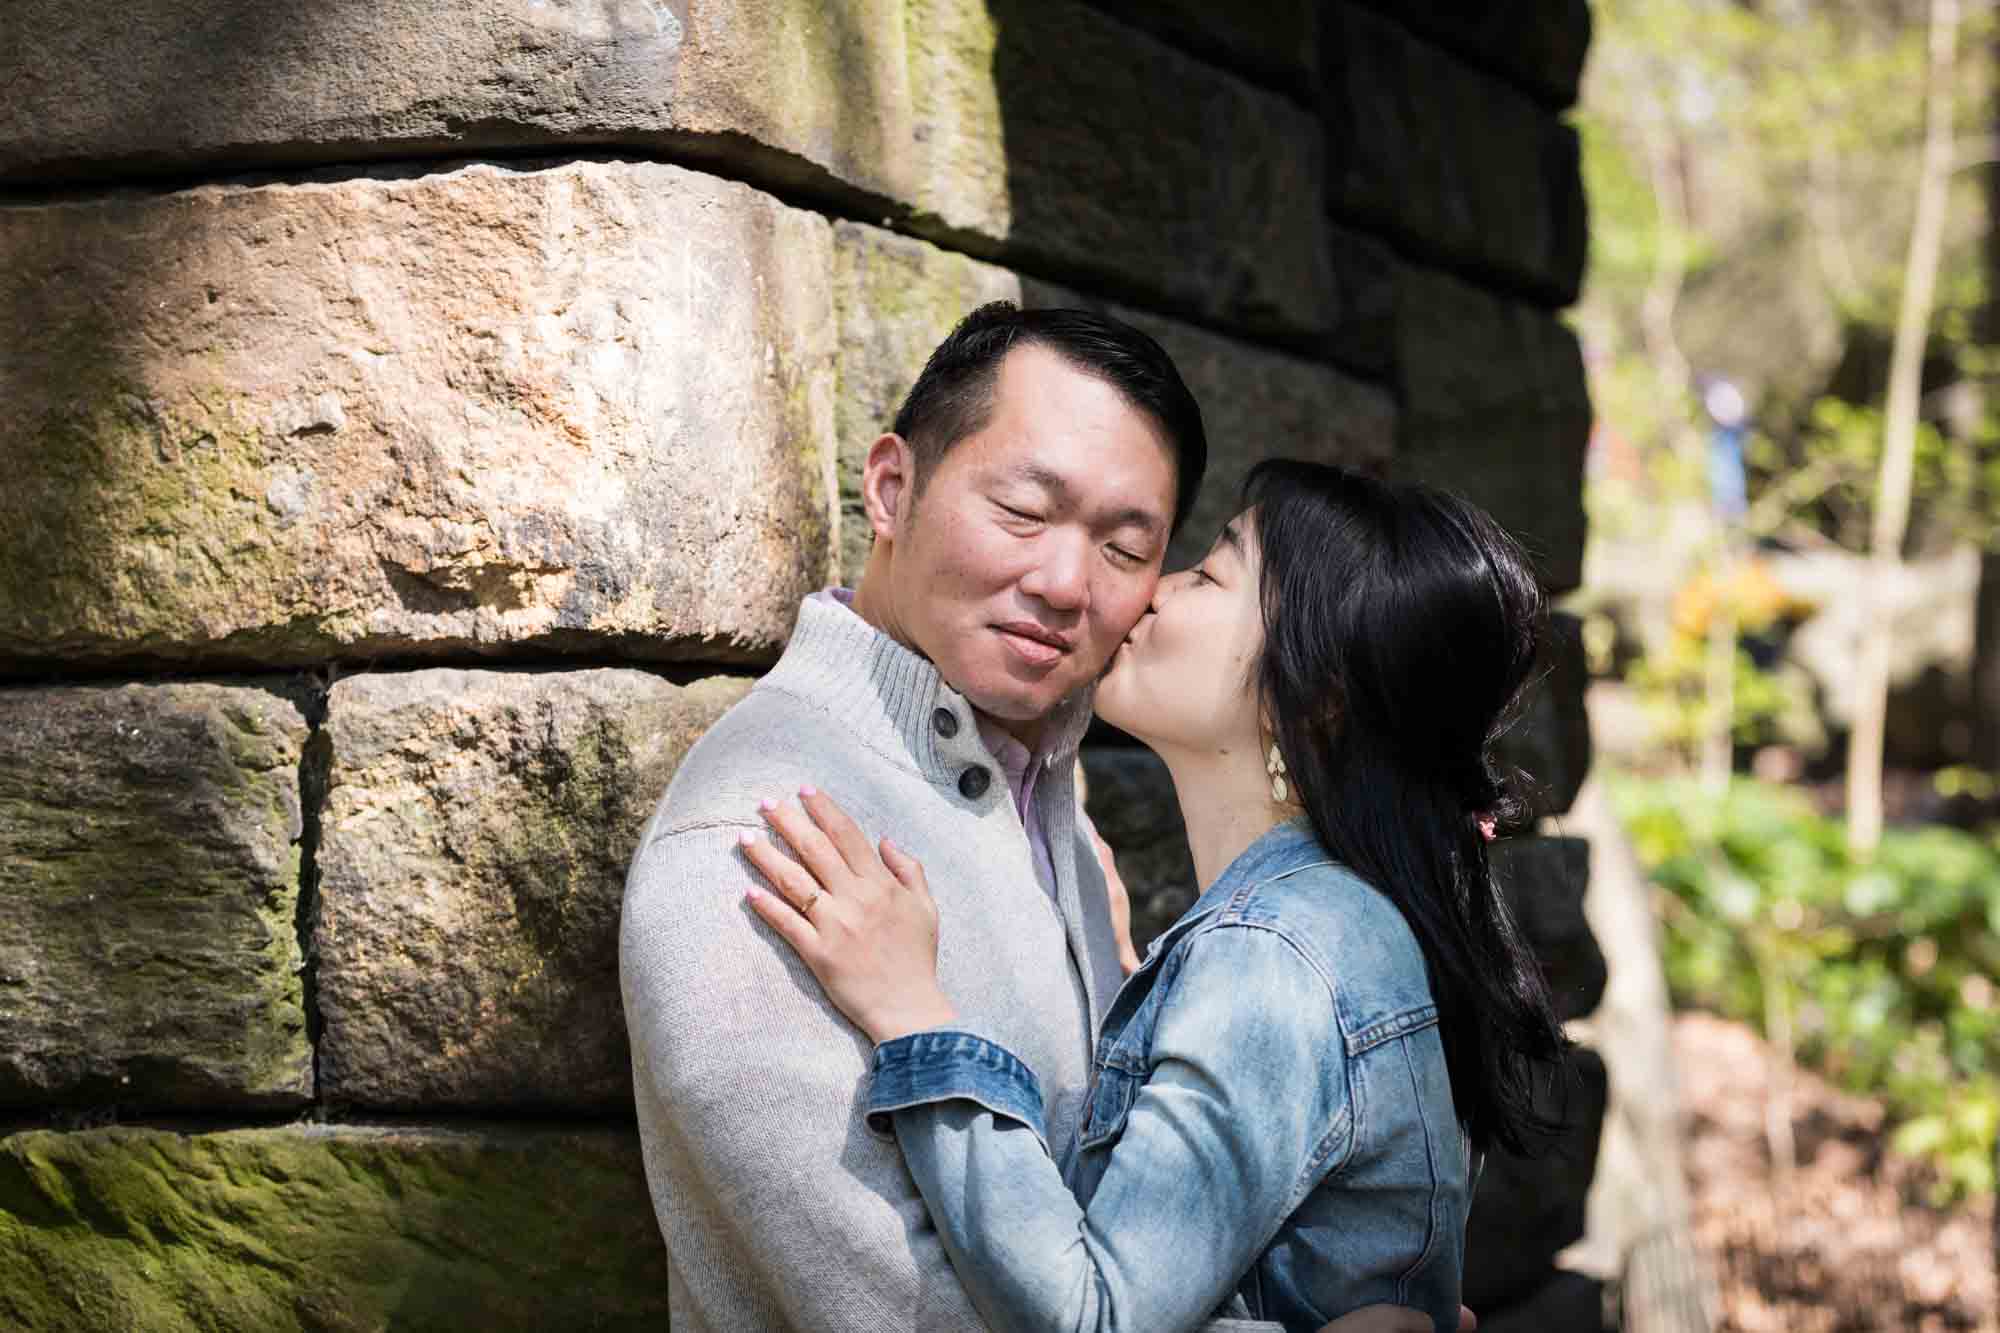 Woman kissing man's cheek in front of the Stone Arch in Central Park